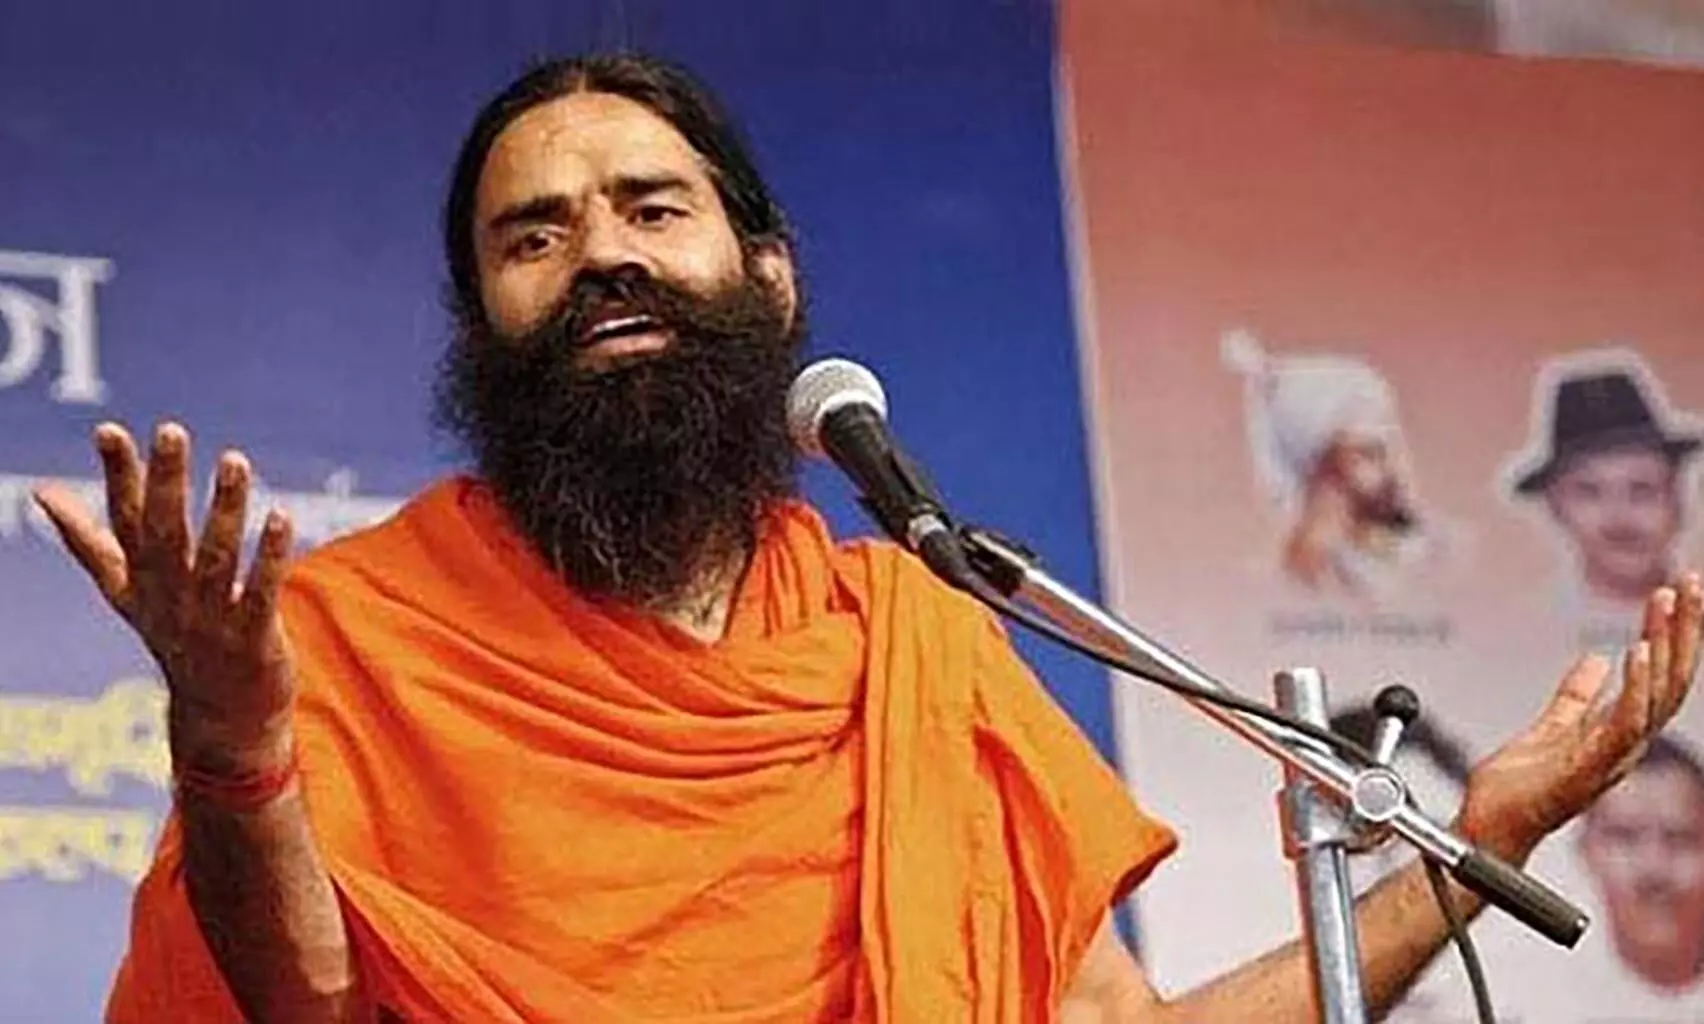 Allopathy is cruelty, violence and crime against humanity: Baba Ramdev